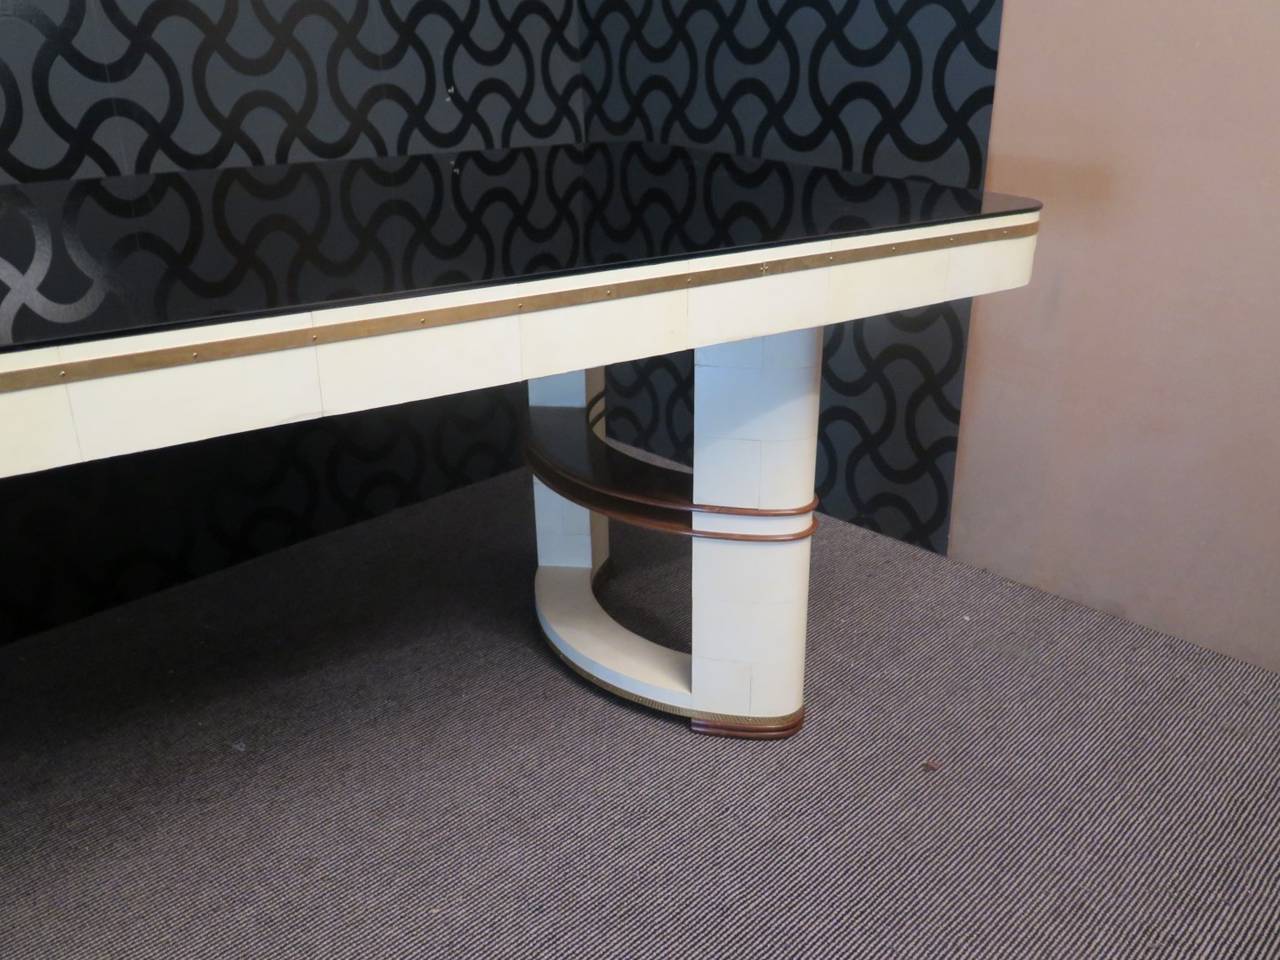 Italian Art Deco table. Composed of three materials, wooden structure then glass and parchment leather. The tabletop is covered by a black glass, well rounded on the corners, it does not have frames around it but it forms a sharp edge with the edge.